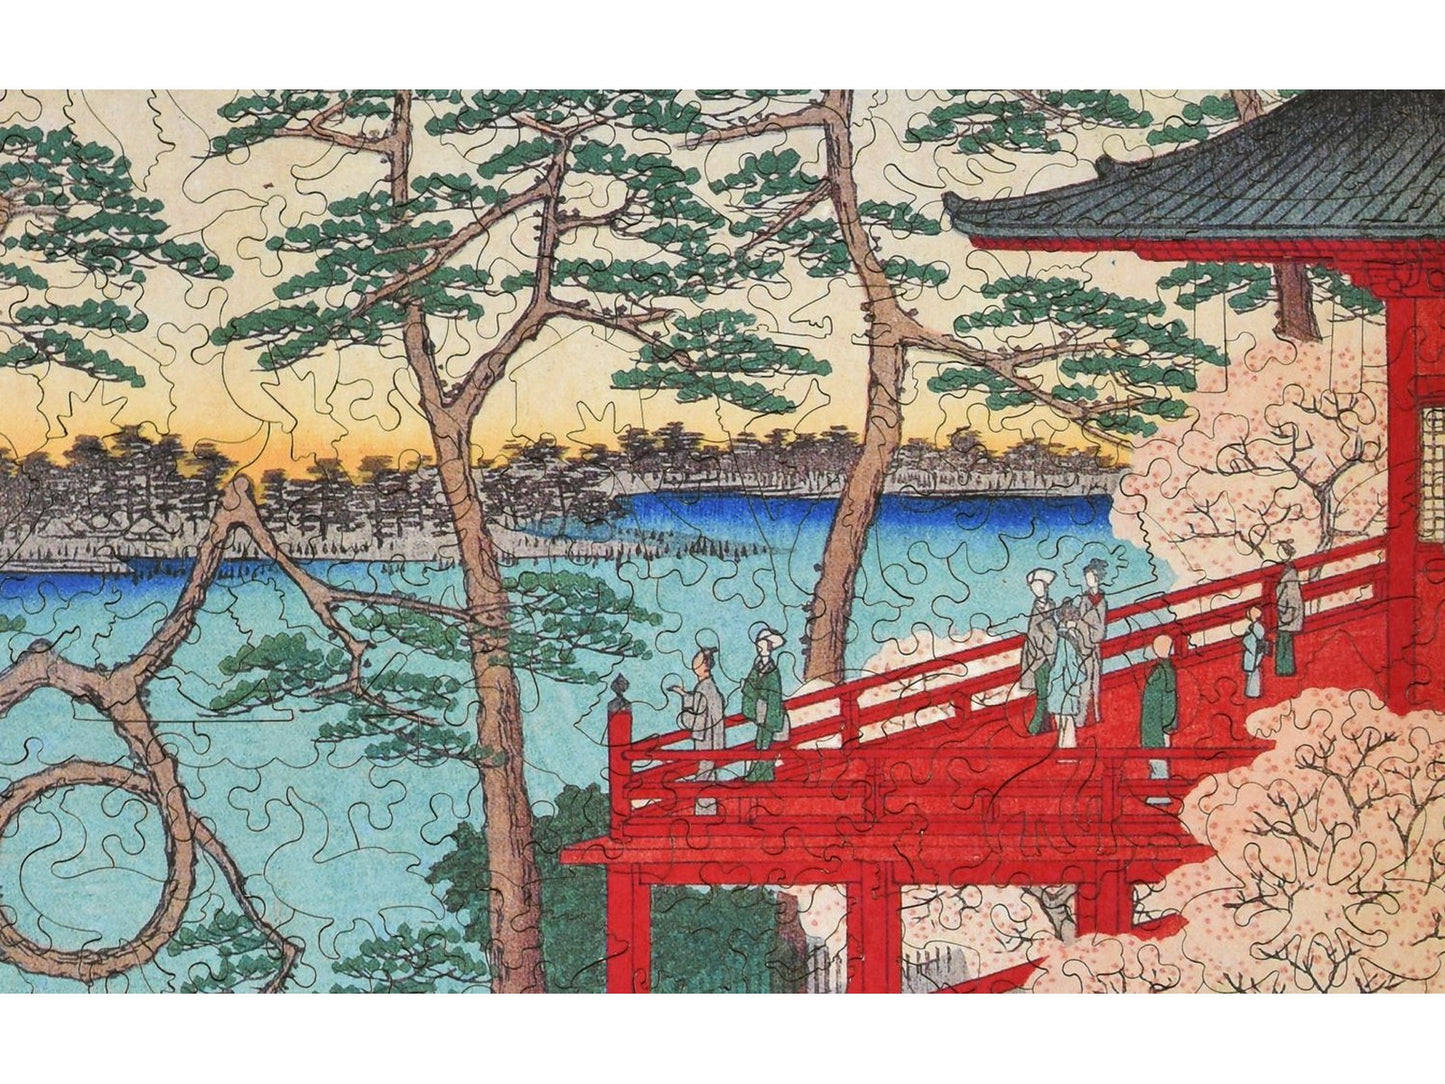 A closeup of the front of the puzzle, Kiyomizu Hall.